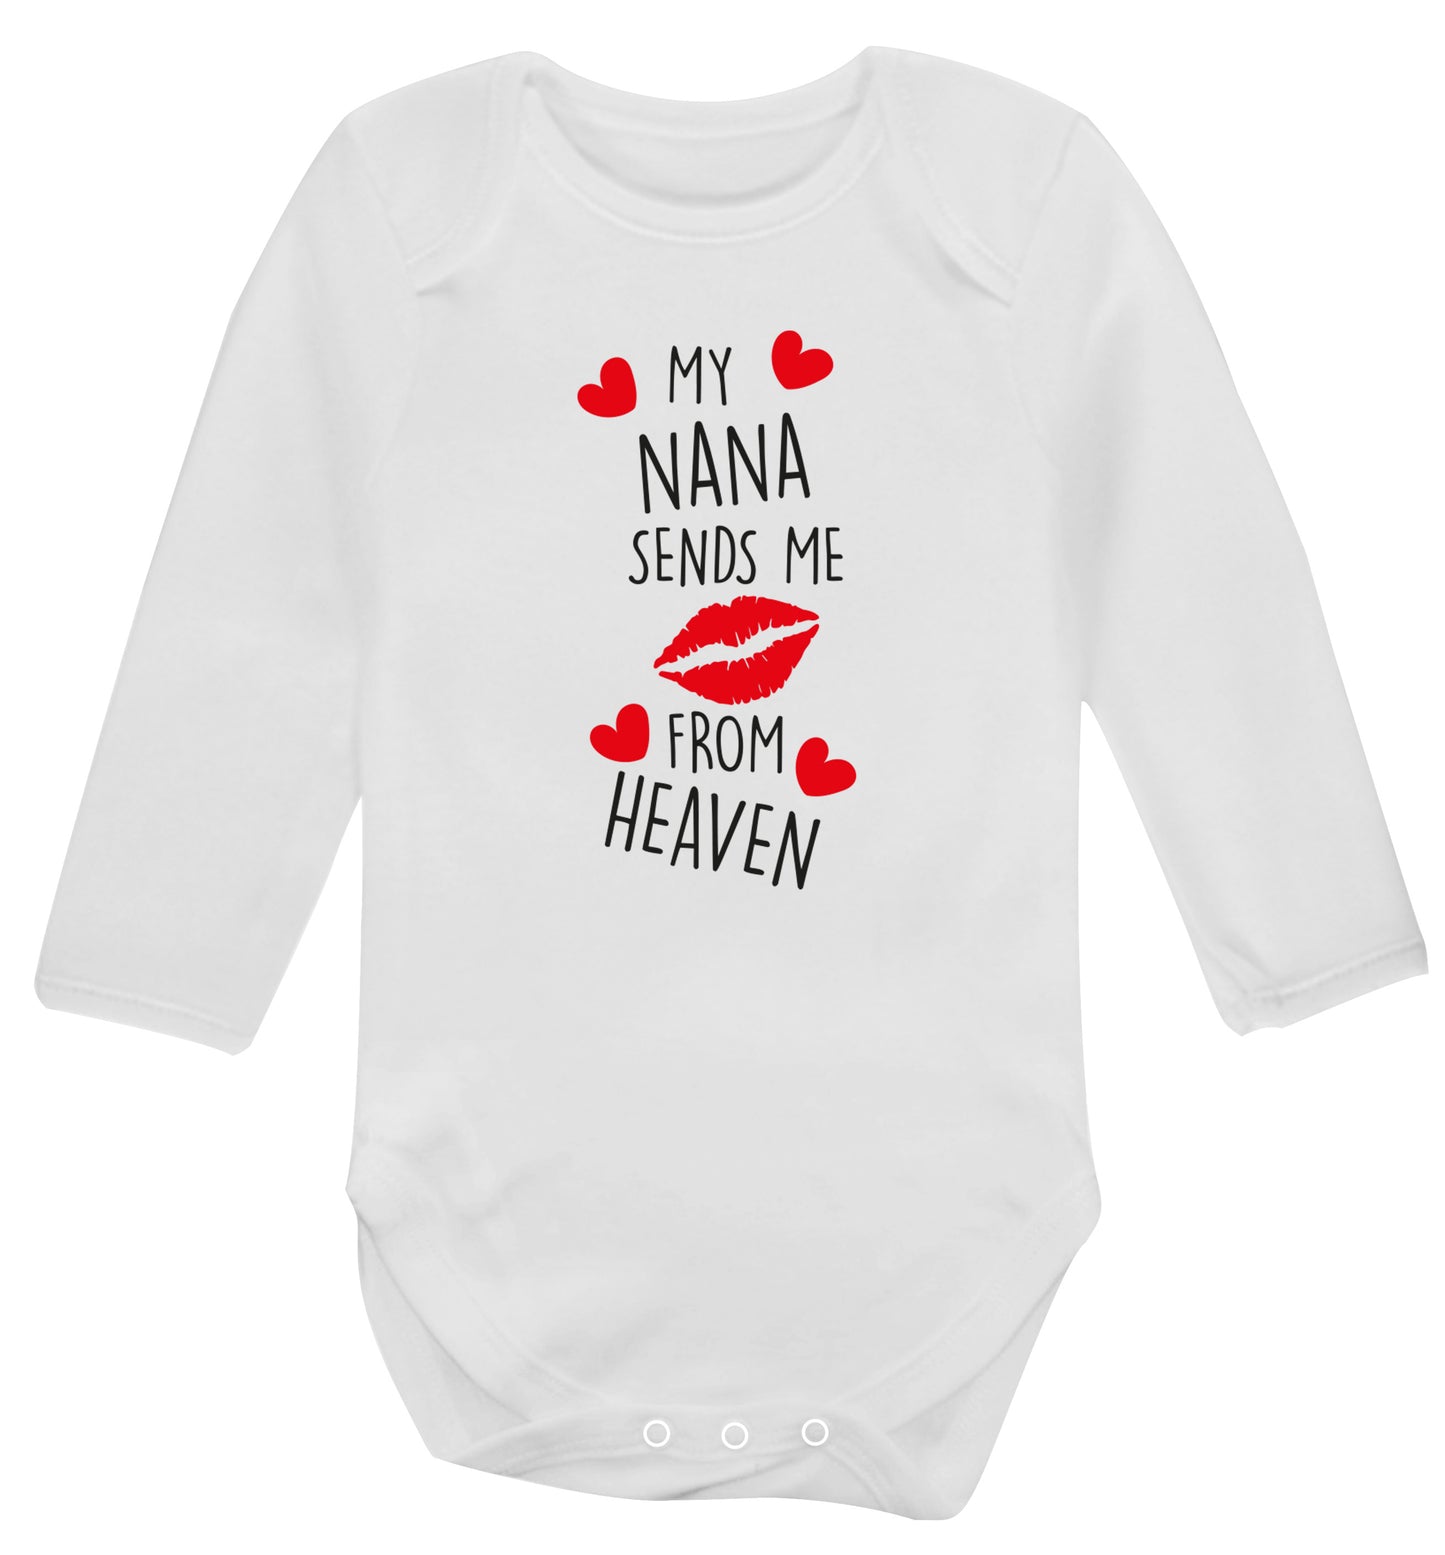 My nana sends me kisses from heaven Baby Vest long sleeved white 6-12 months